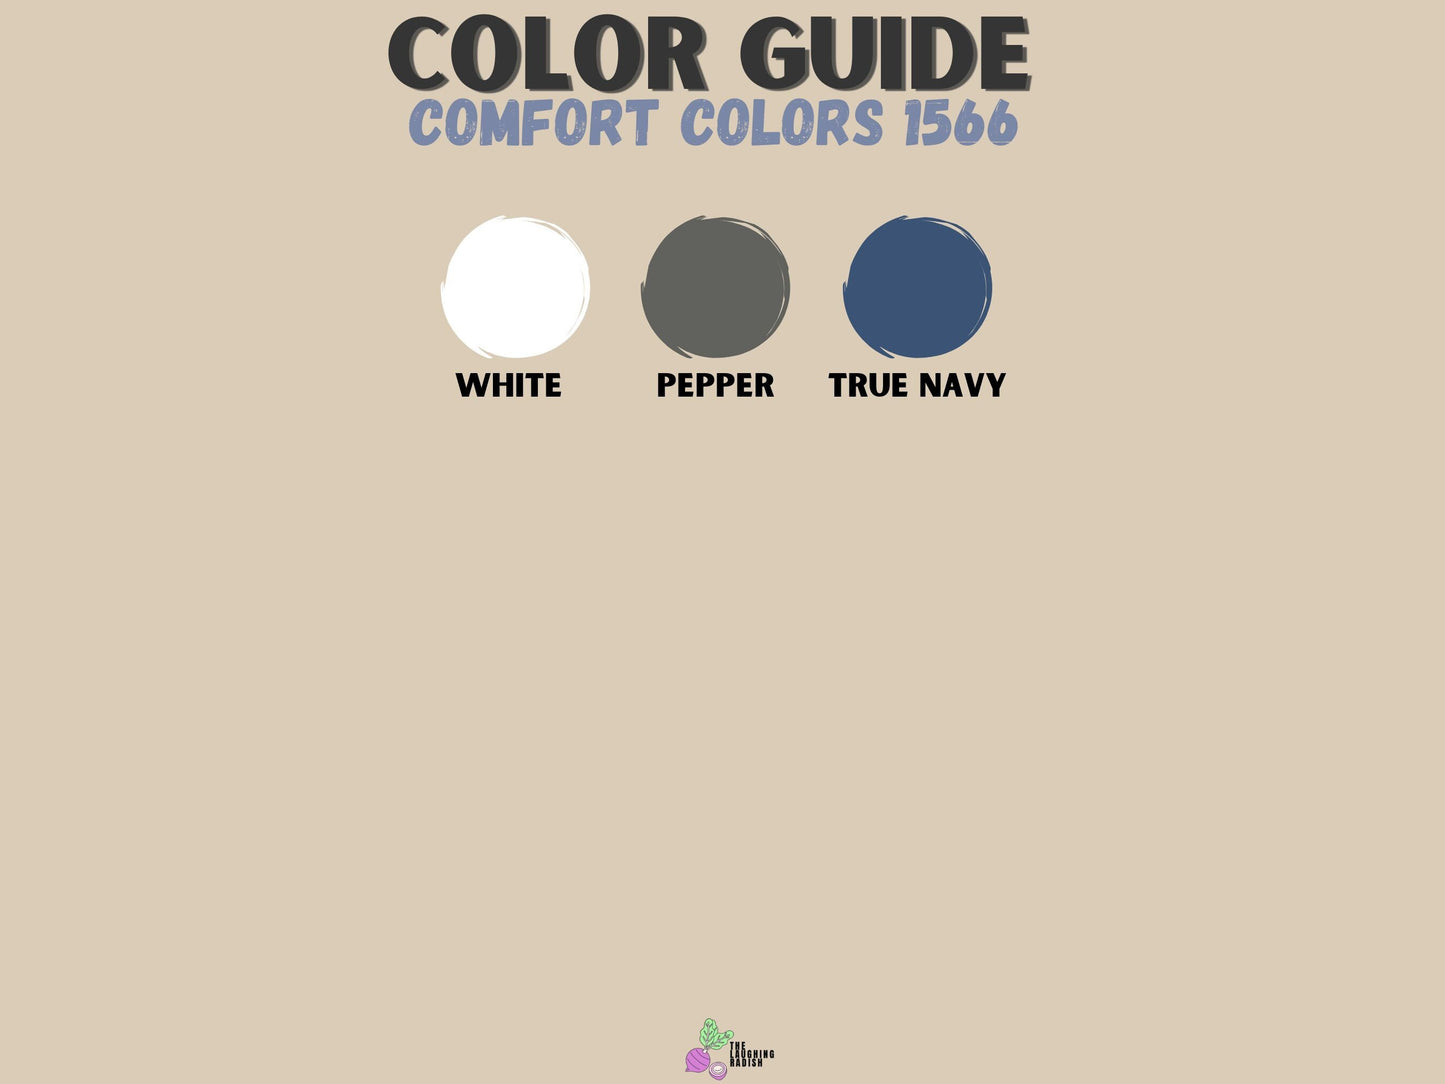 A color guide matching colors with shirt text options including white, pepper, and true navy.